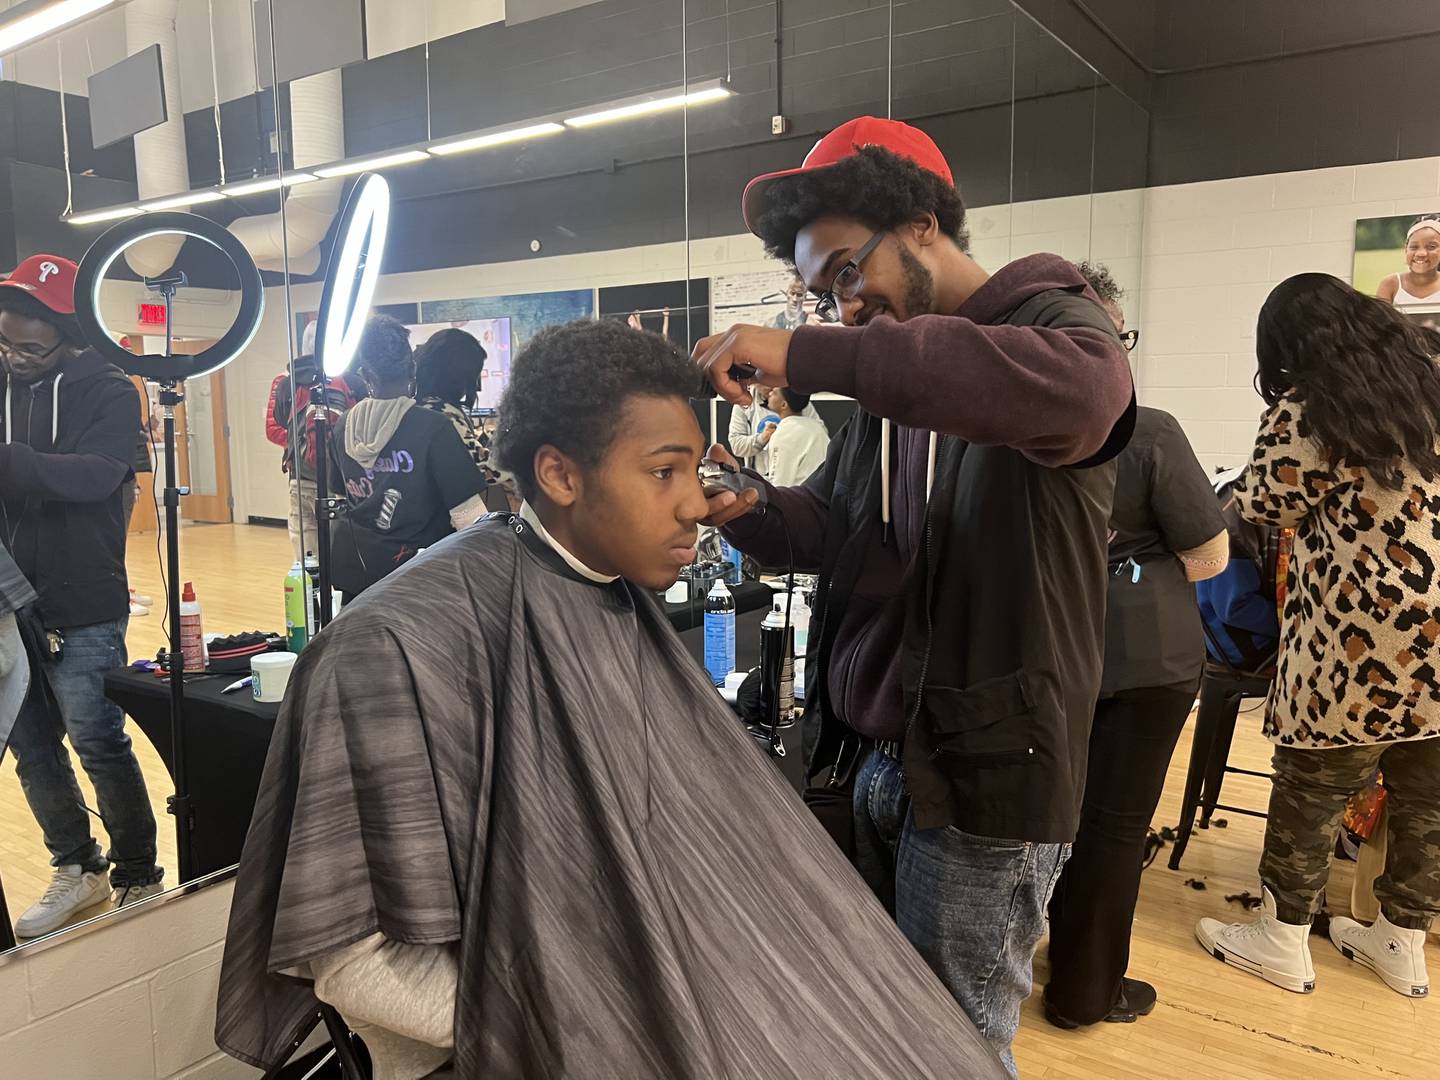 Michael Williams, 17, gets a free haircut from Lawrence Mayo, a barber, Friday afternoon.